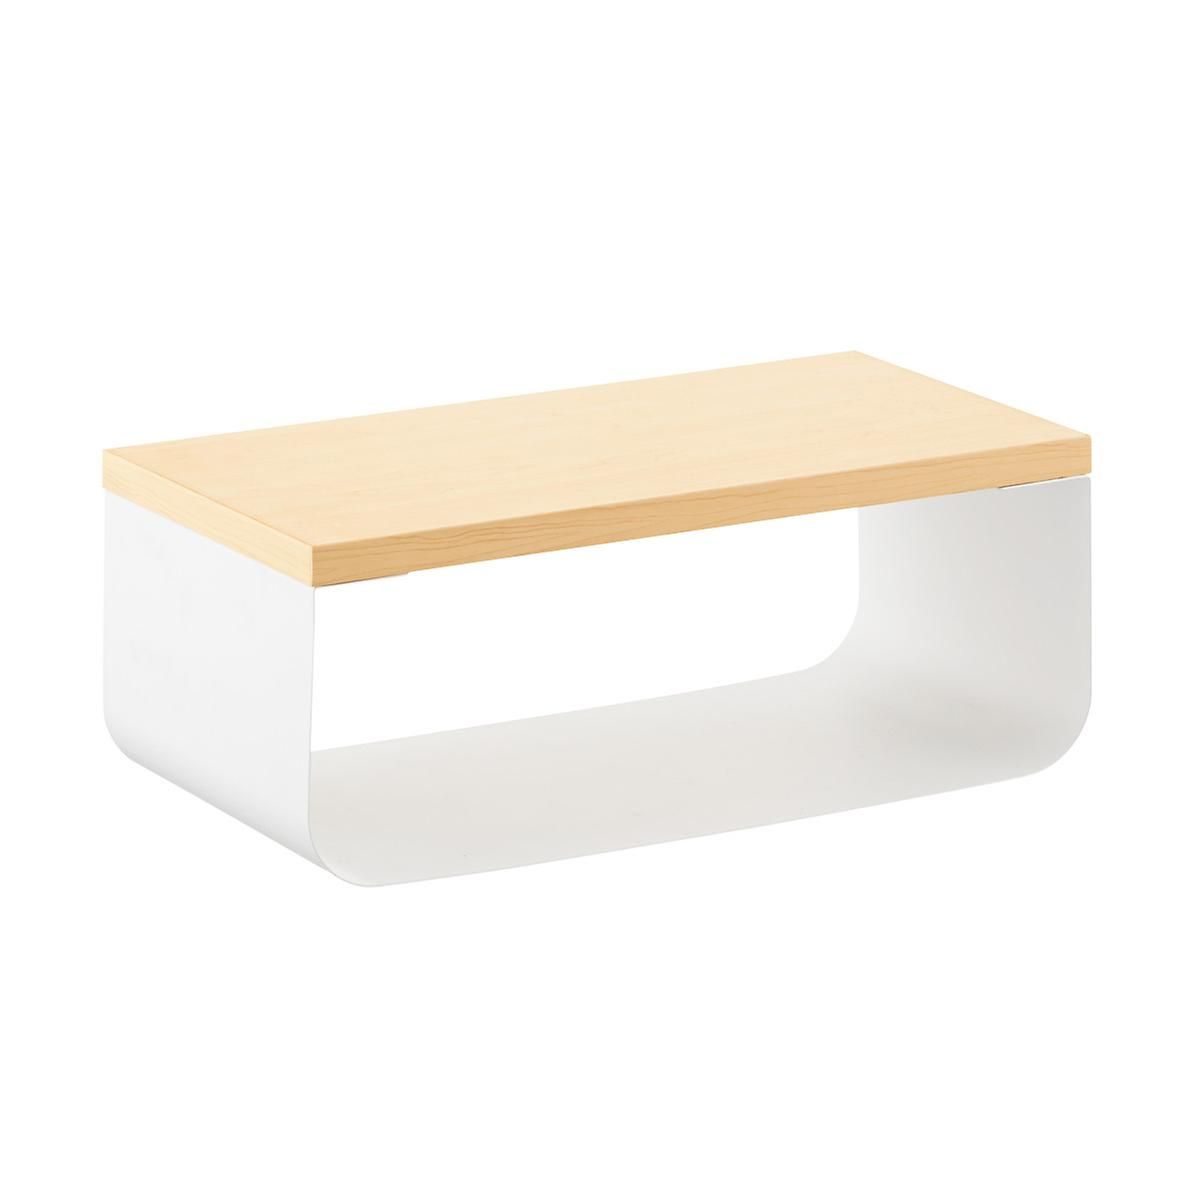 Umbra Bijou Floating Shelf Cubby | The Container Store